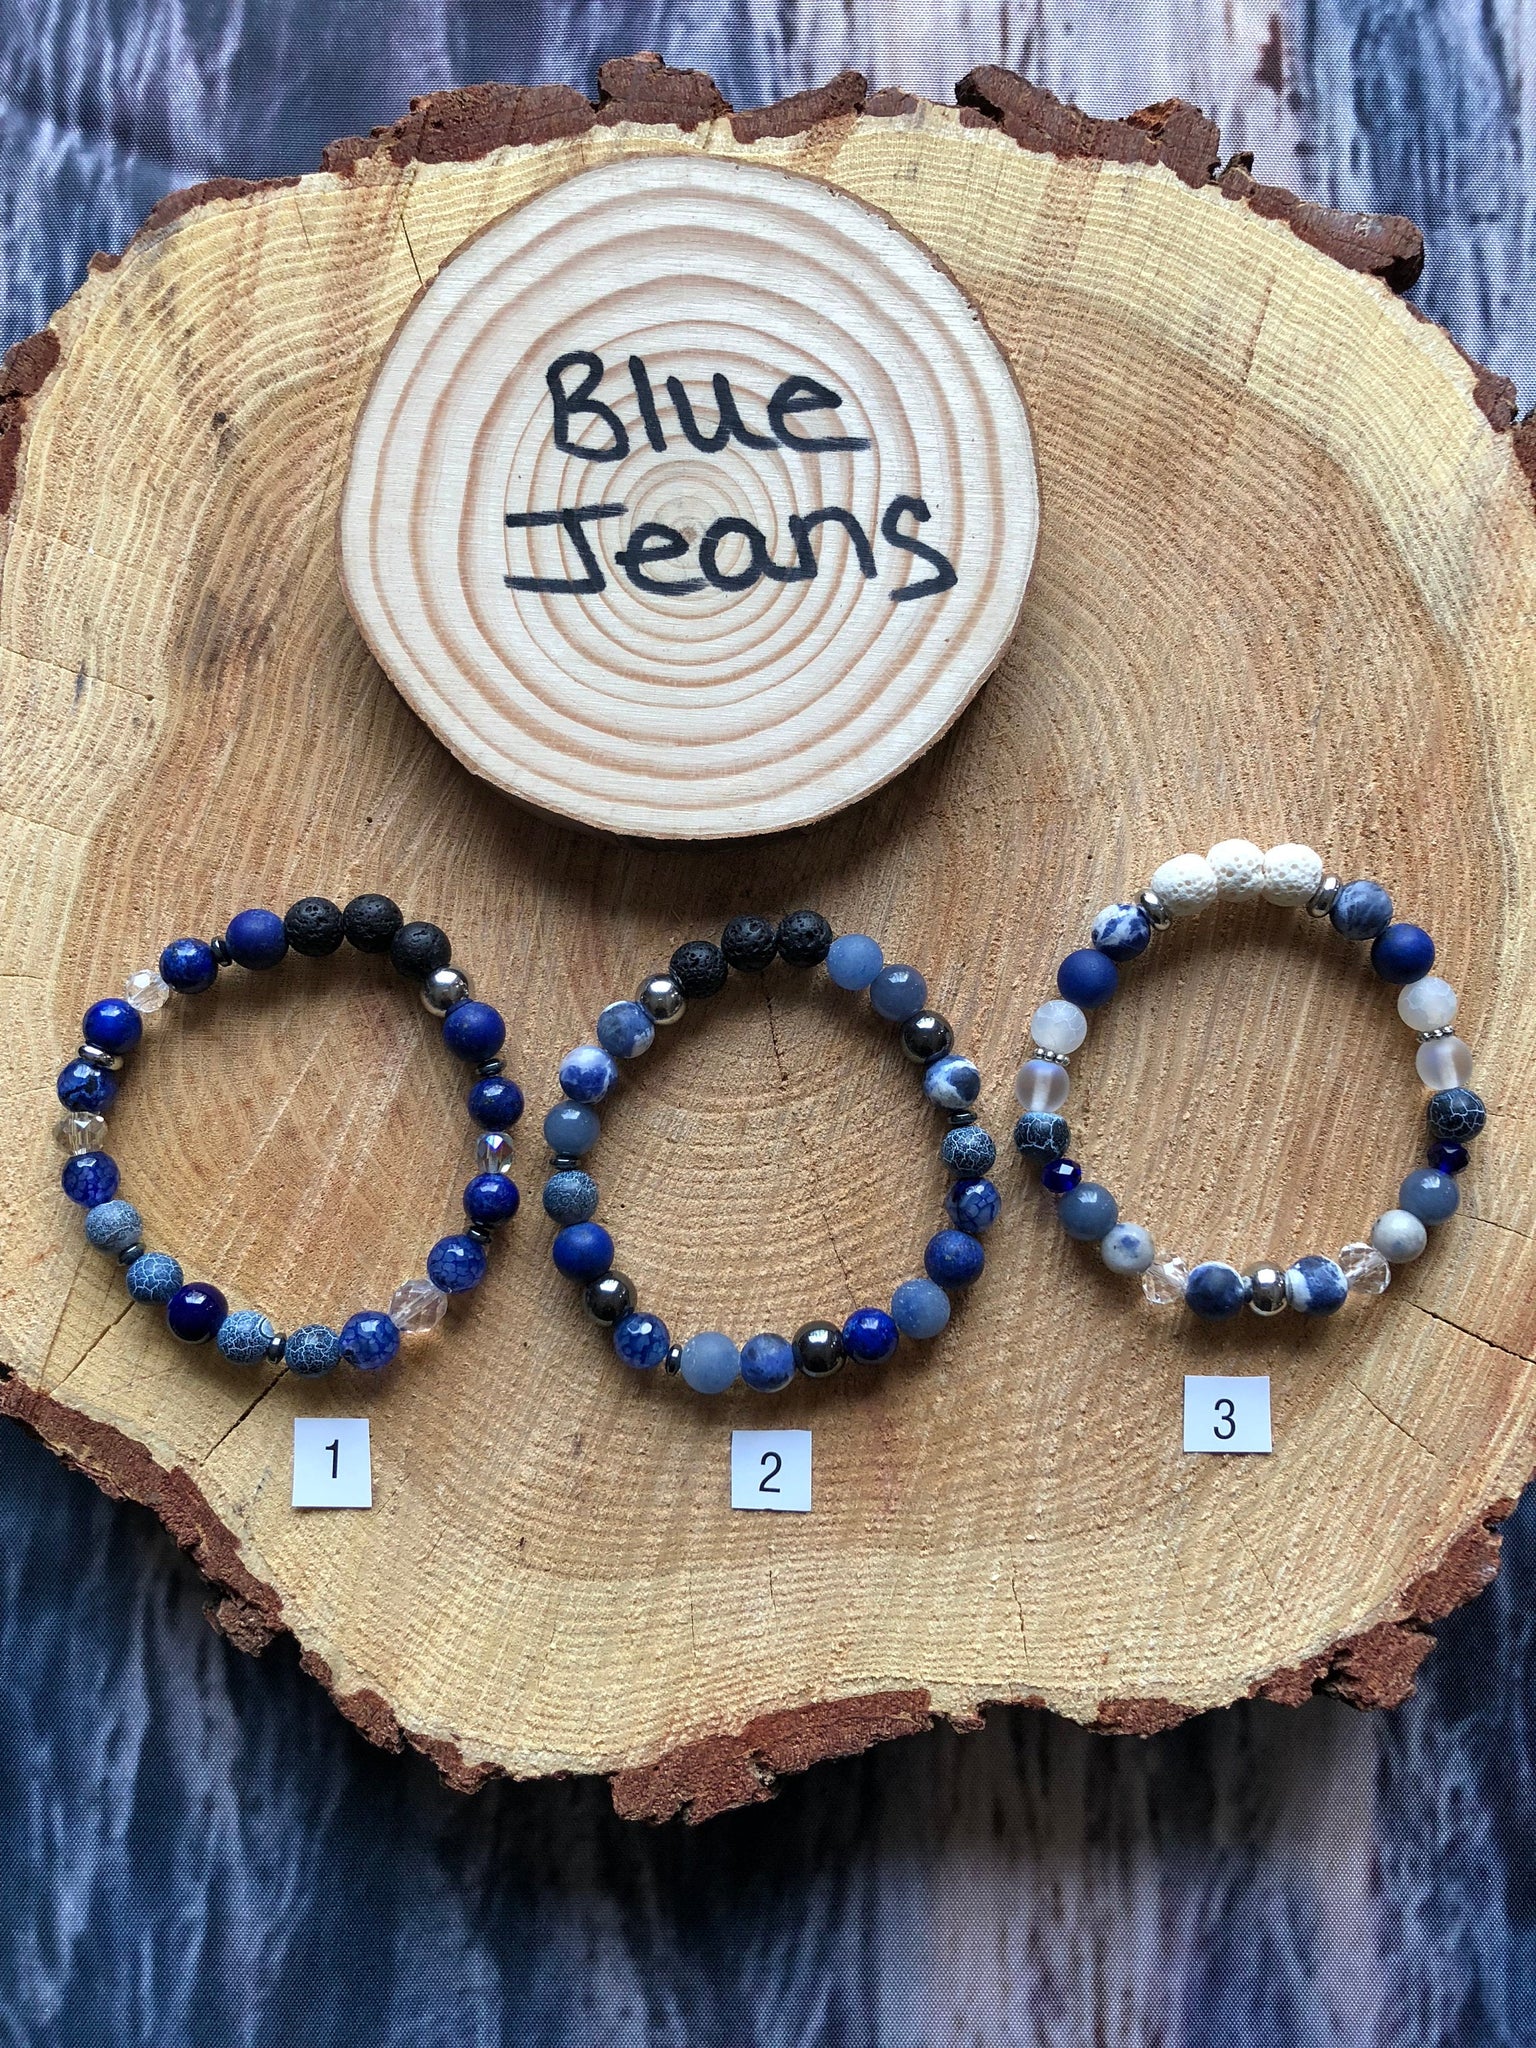 Proud Band Geek Blue Jean Beaded Toggle Bracelet - American Made Pewter  Bracelets from Chubby Chico Charms